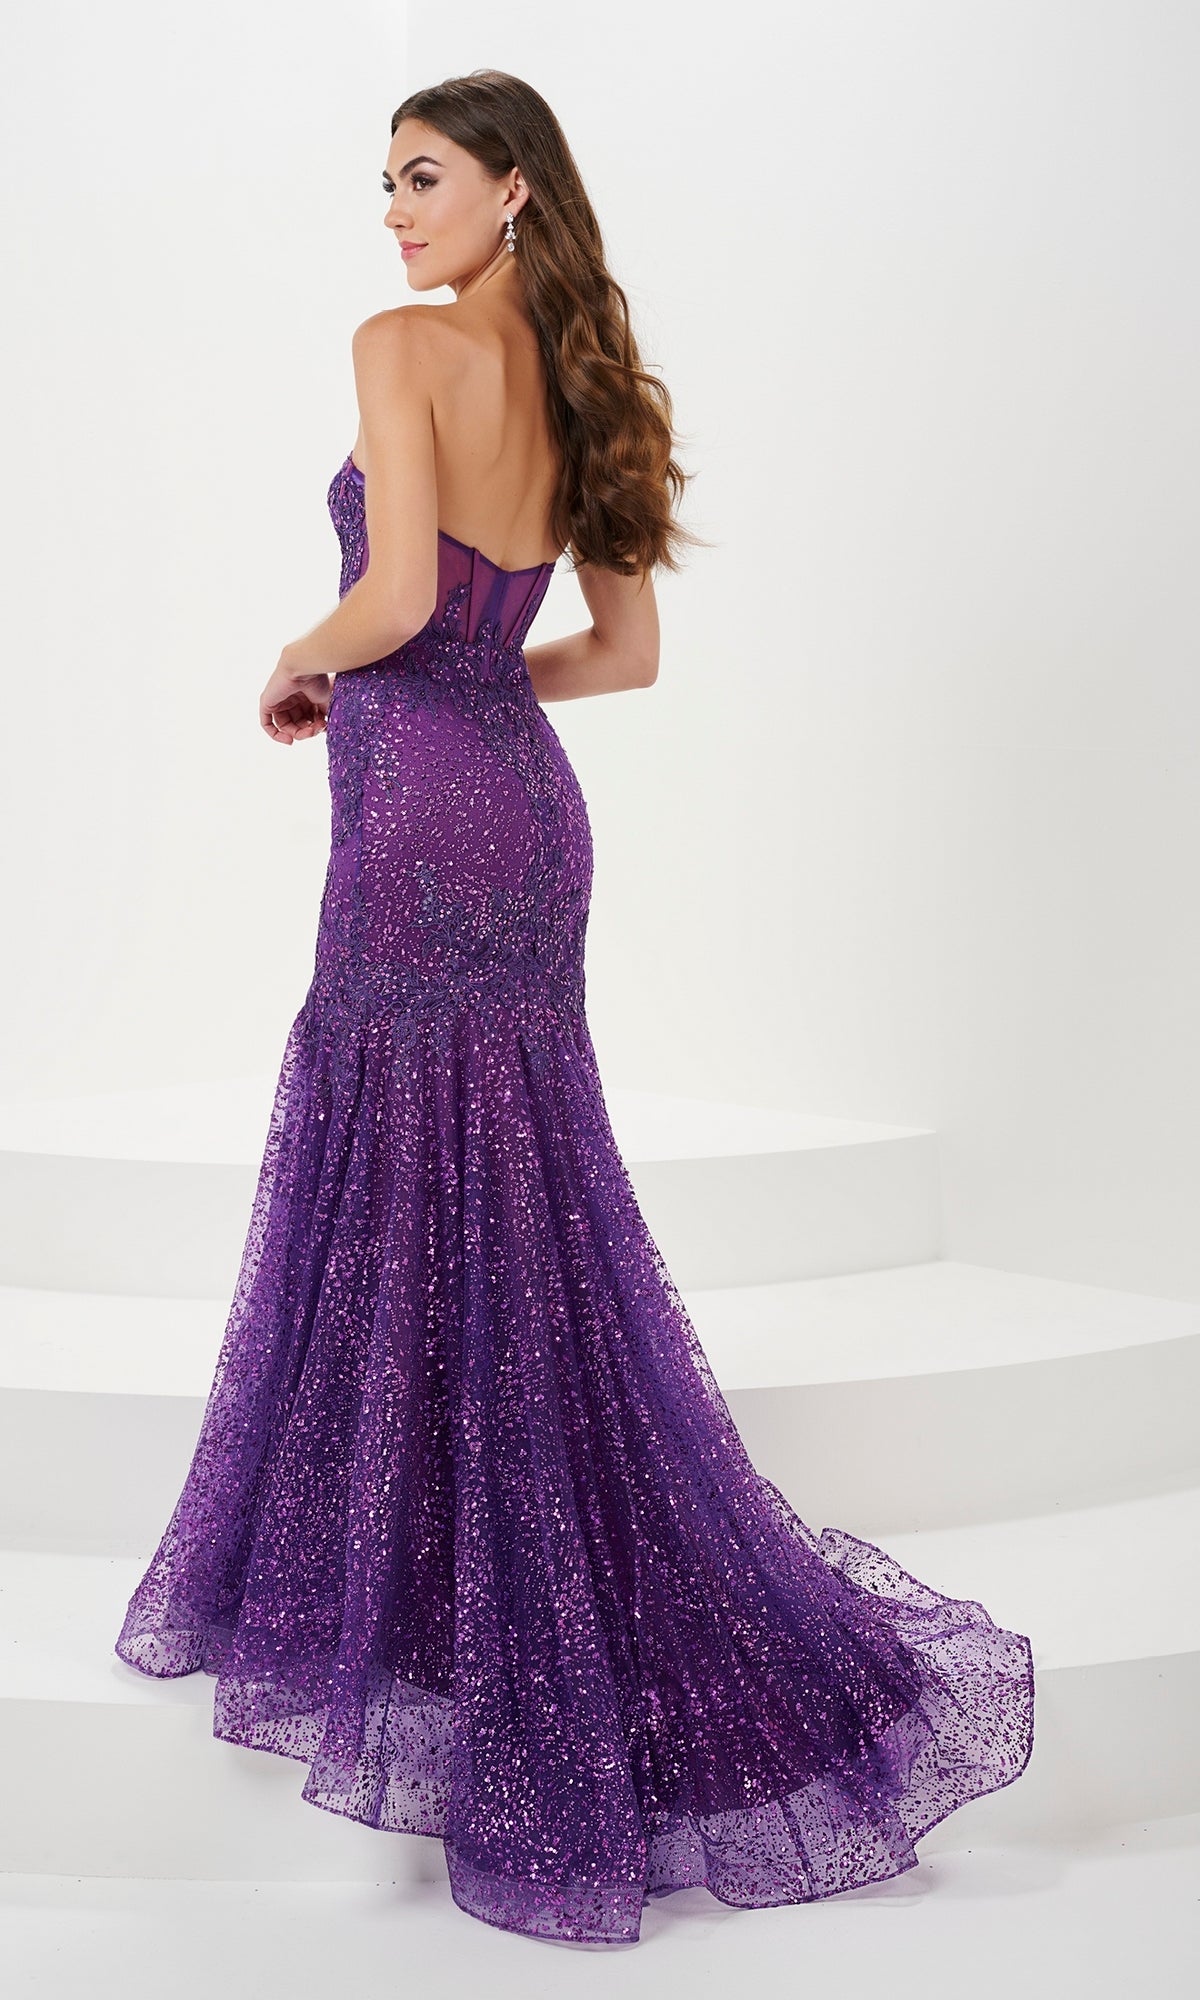 Long Prom Dress 14174 by Panoply